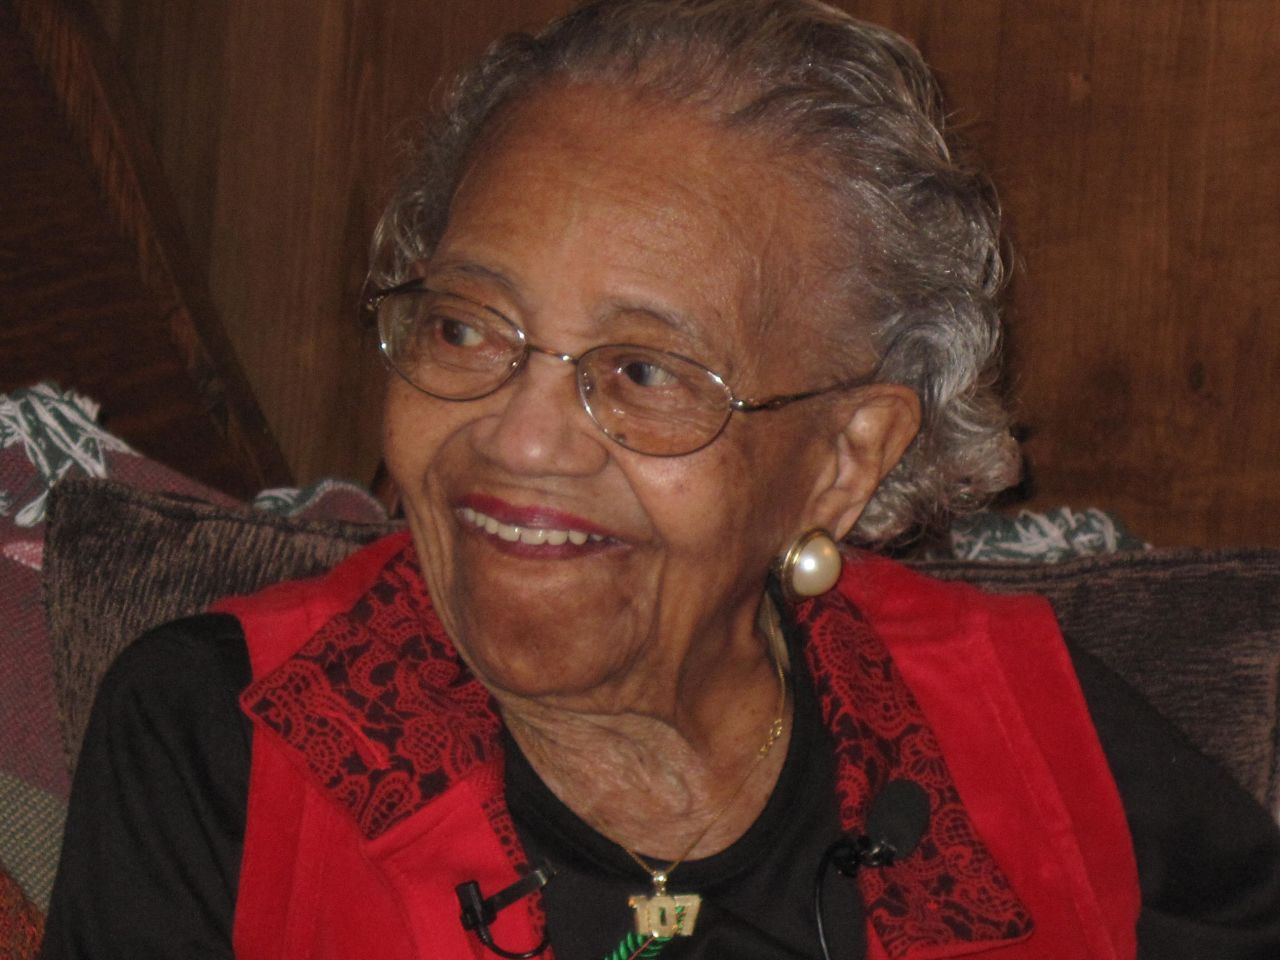 <a href="http://www.cnn.com/2008/POLITICS/10/20/centenarian.votes/">Ann Nixon Cooper became famous</a> after President-elect Barack Obama used her story on election night 2008 to talk about the country's progress. "She was born just a generation past slavery," Obama said. "At a time when women's voices were silenced and their hopes dismissed, she lived to see them stand up and speak out and reach for the ballot." She died in 2009 at age 107. The secret to her long life, she said, was being cheerful: "I've always been a happy person, a giggling person, a wide-mouthed person." She also kept fit, dancing the electric slide until age 103. 